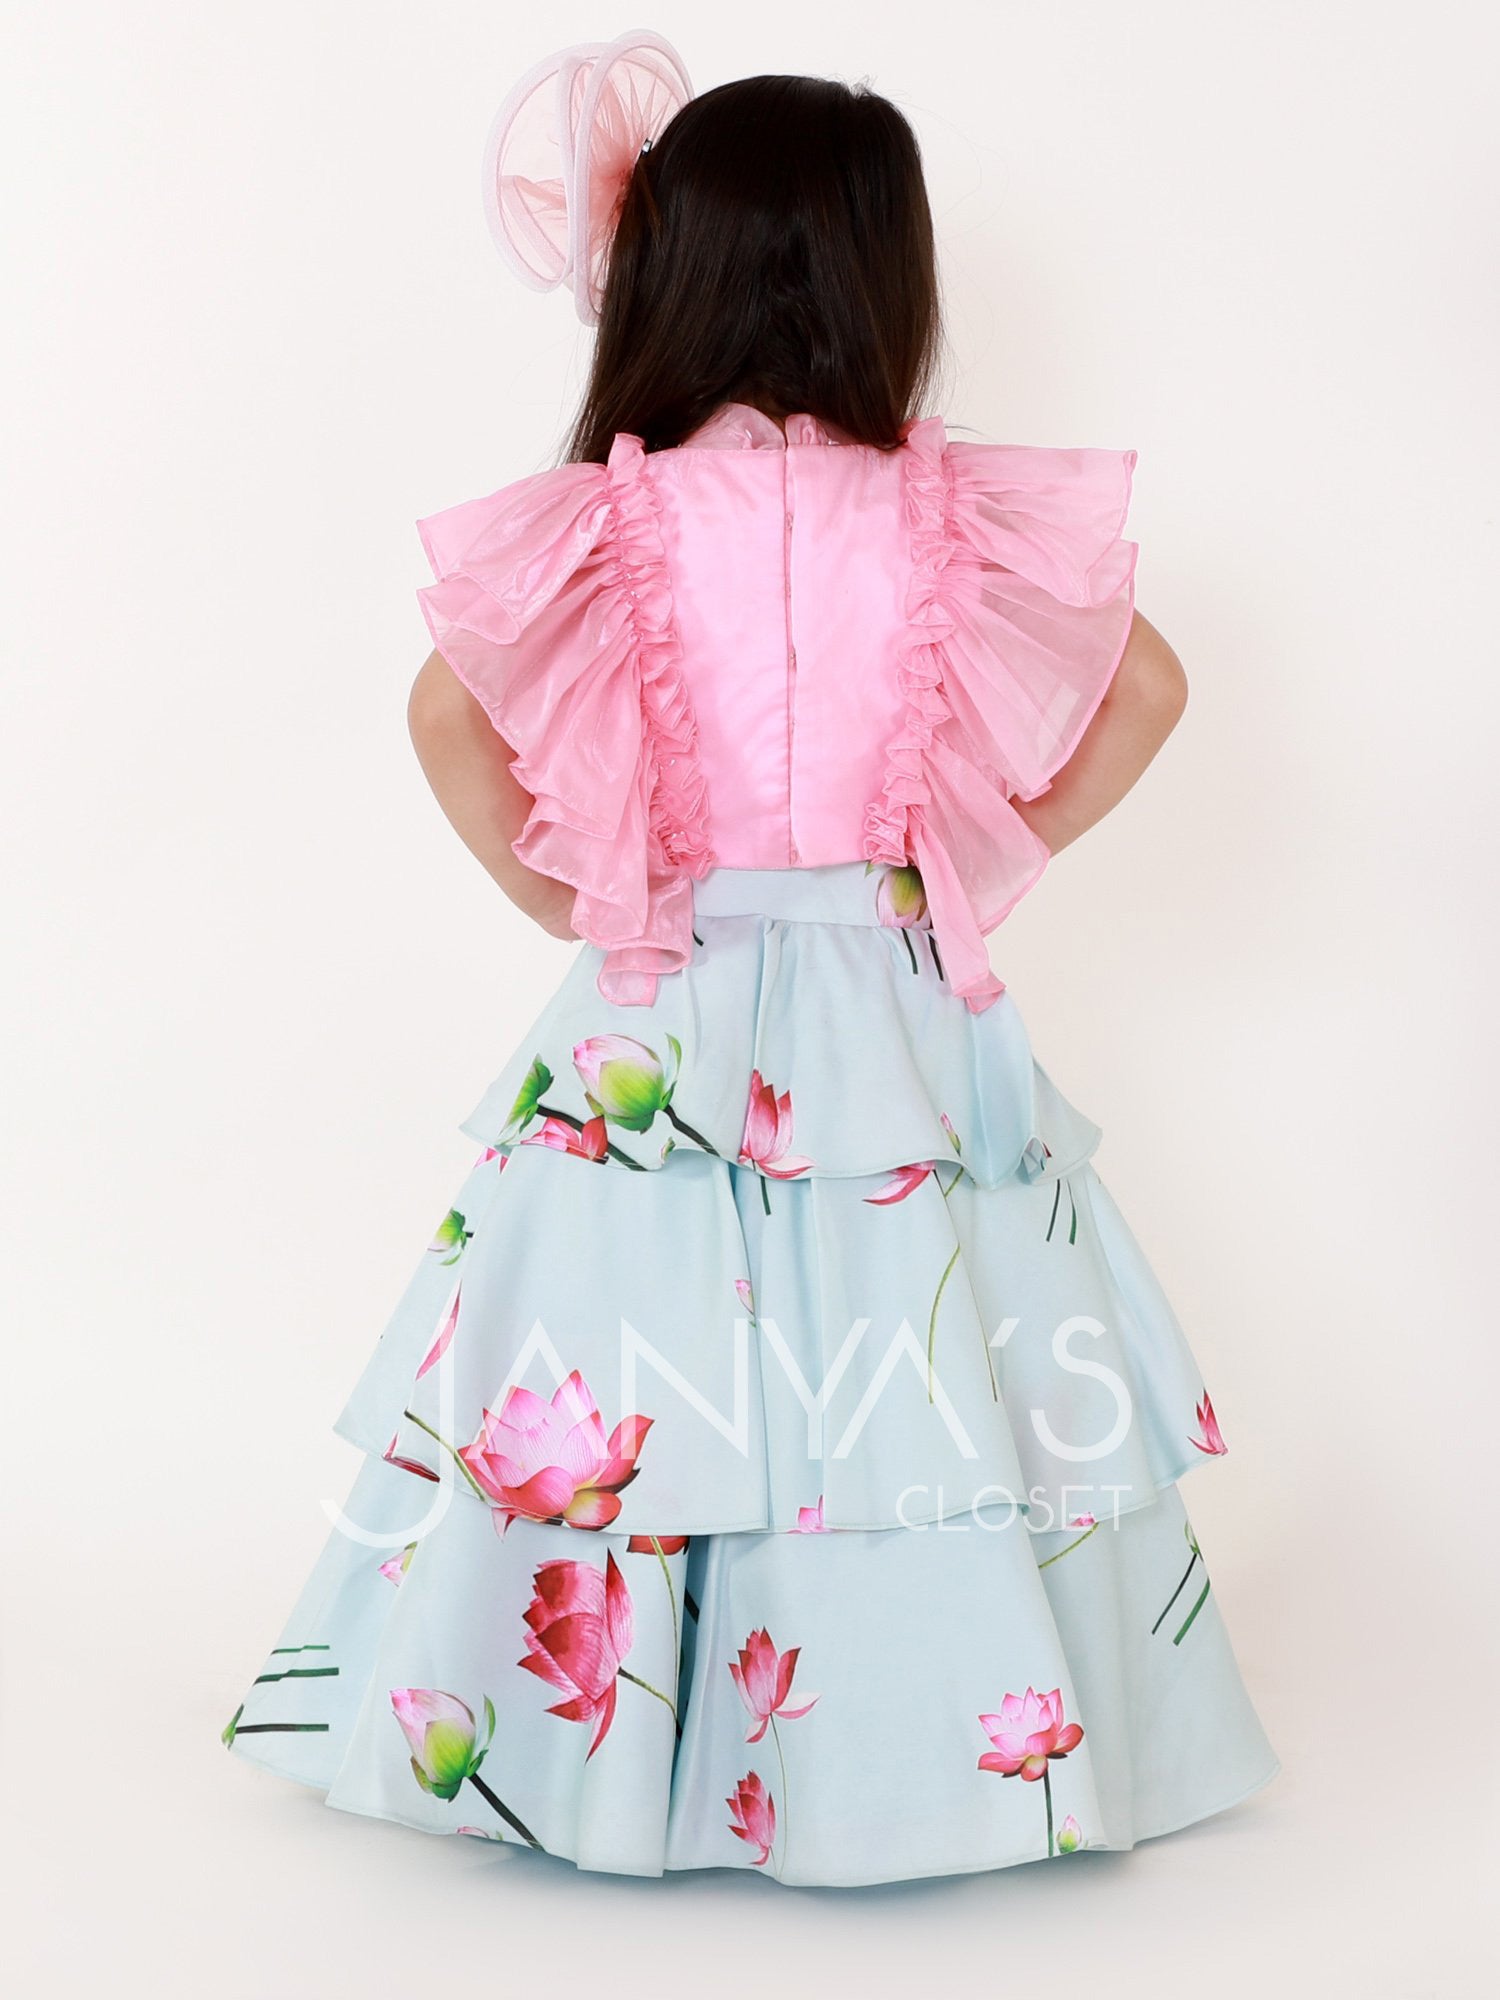 Printed Satin Layered Skirt With Organza Top And Hair Accessory